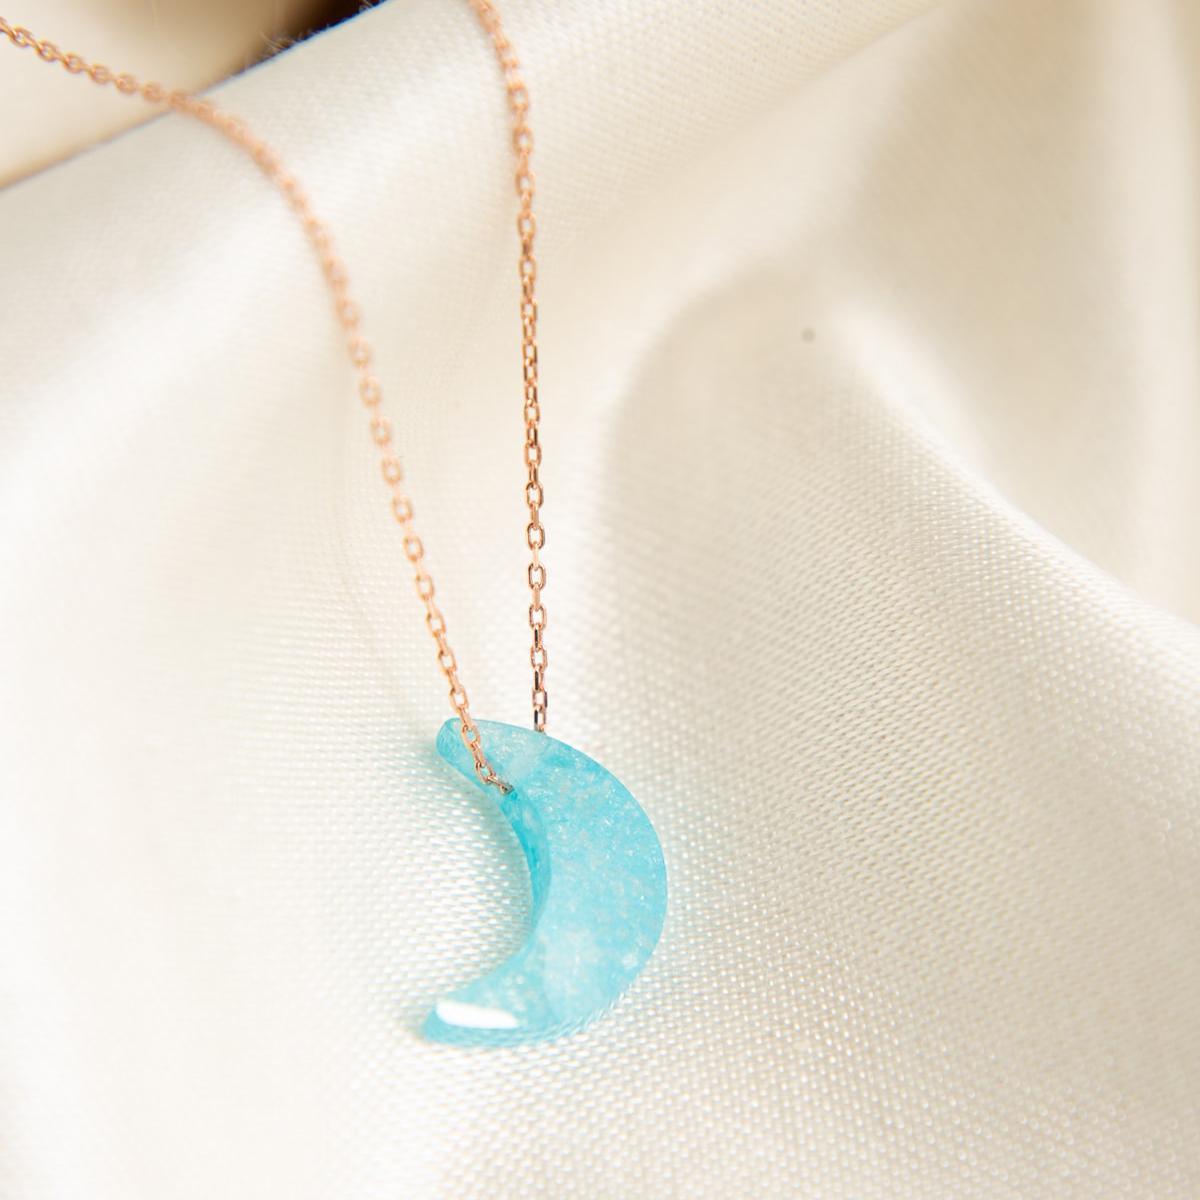 Blue Turquoise Moon Crescent Necklace • Turquoise Necklace Pendant - Trending Silver Gifts